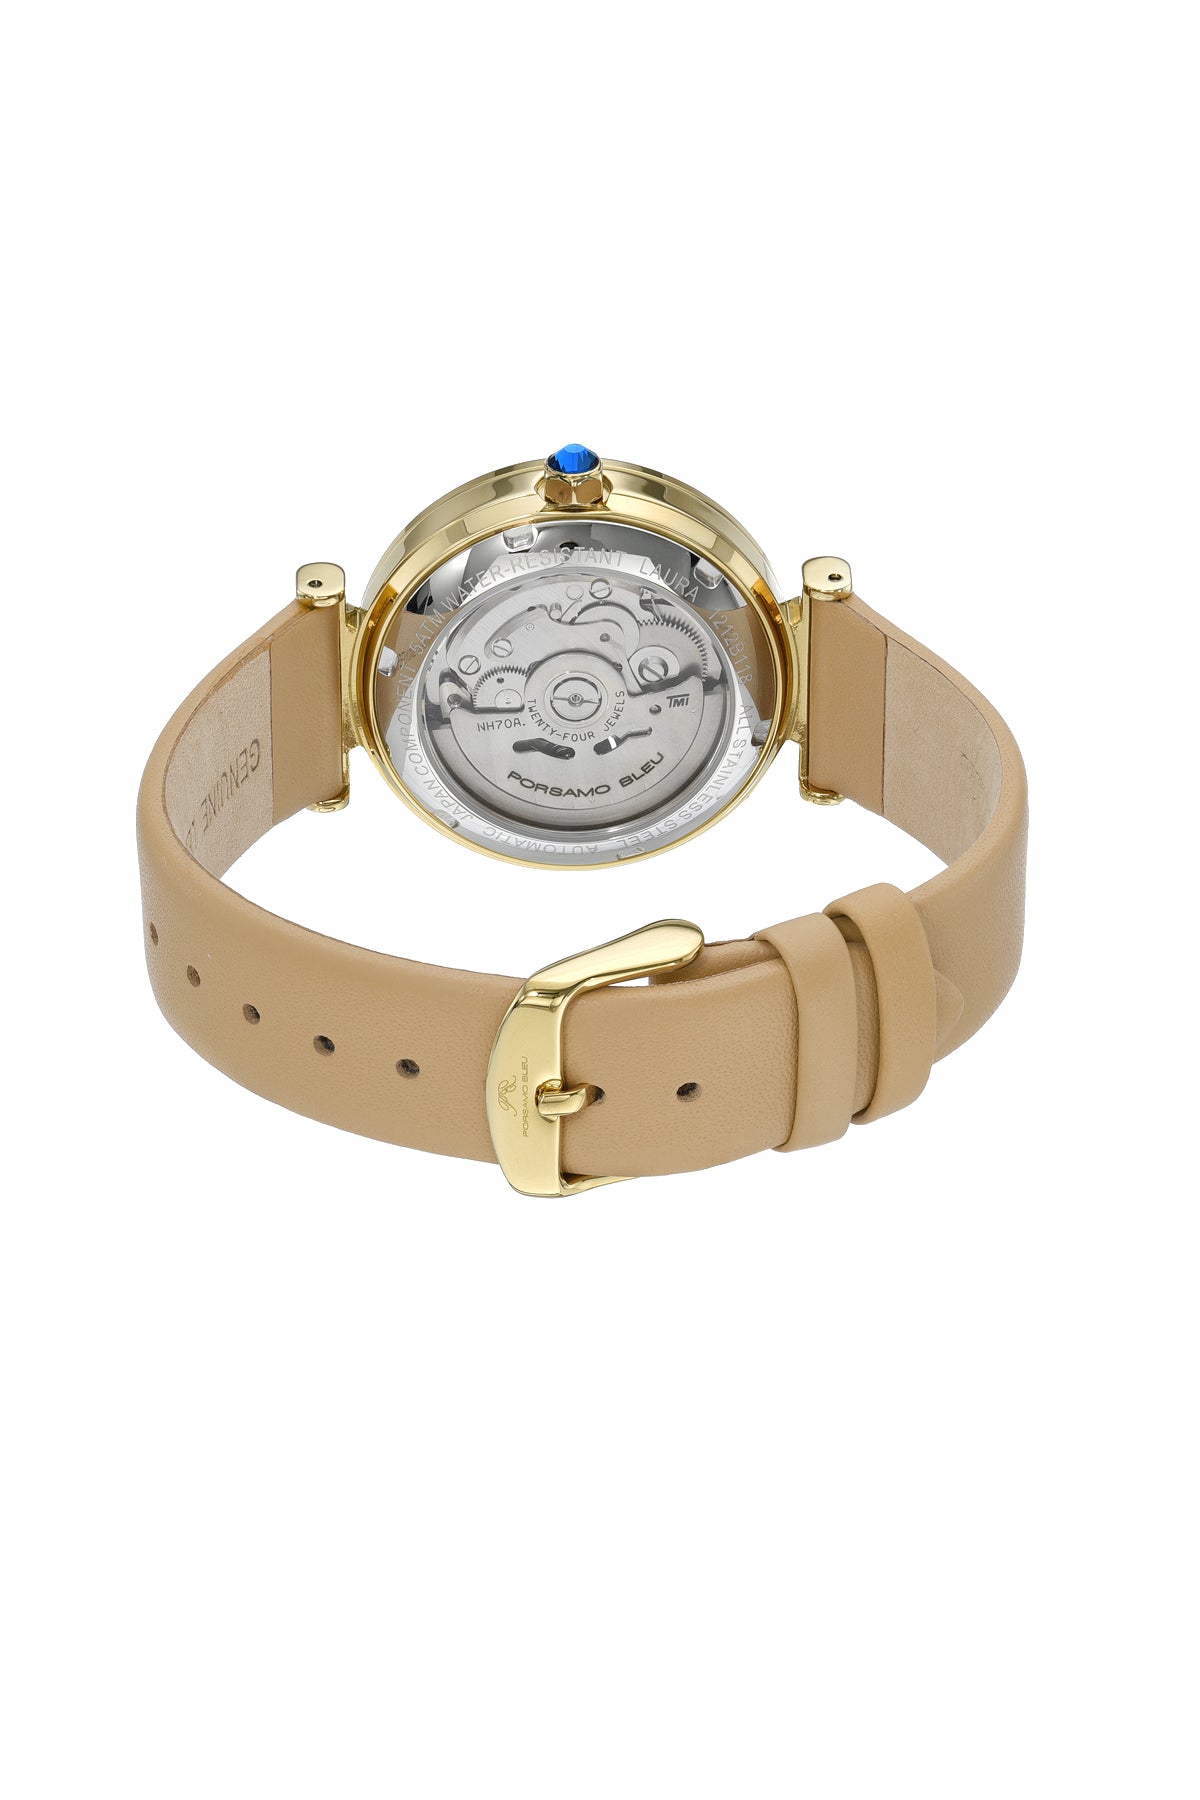 Porsamo Bleu Laura Luxury Automatic Topaz Women's Genuine Leather Band Watch, With Mother Of Pearl Skeleton Dial, Gold, Beige 1212BLAL